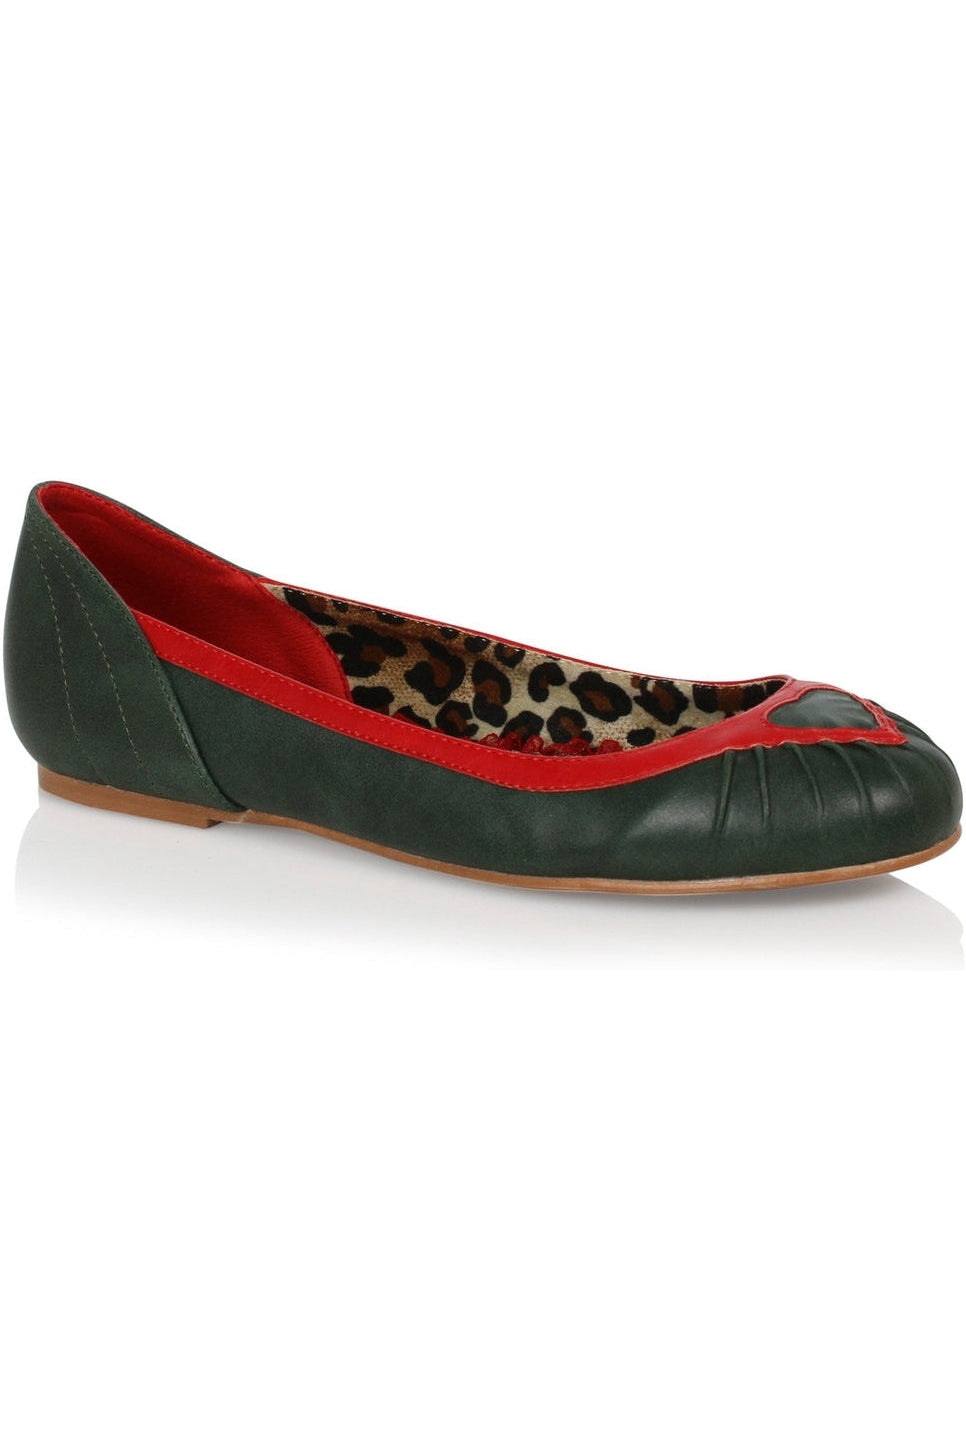 Bettie Page Frances Flat | Green Faux Leather-Flats-Bettie Page by Ellie-SEXYSHOES.COM